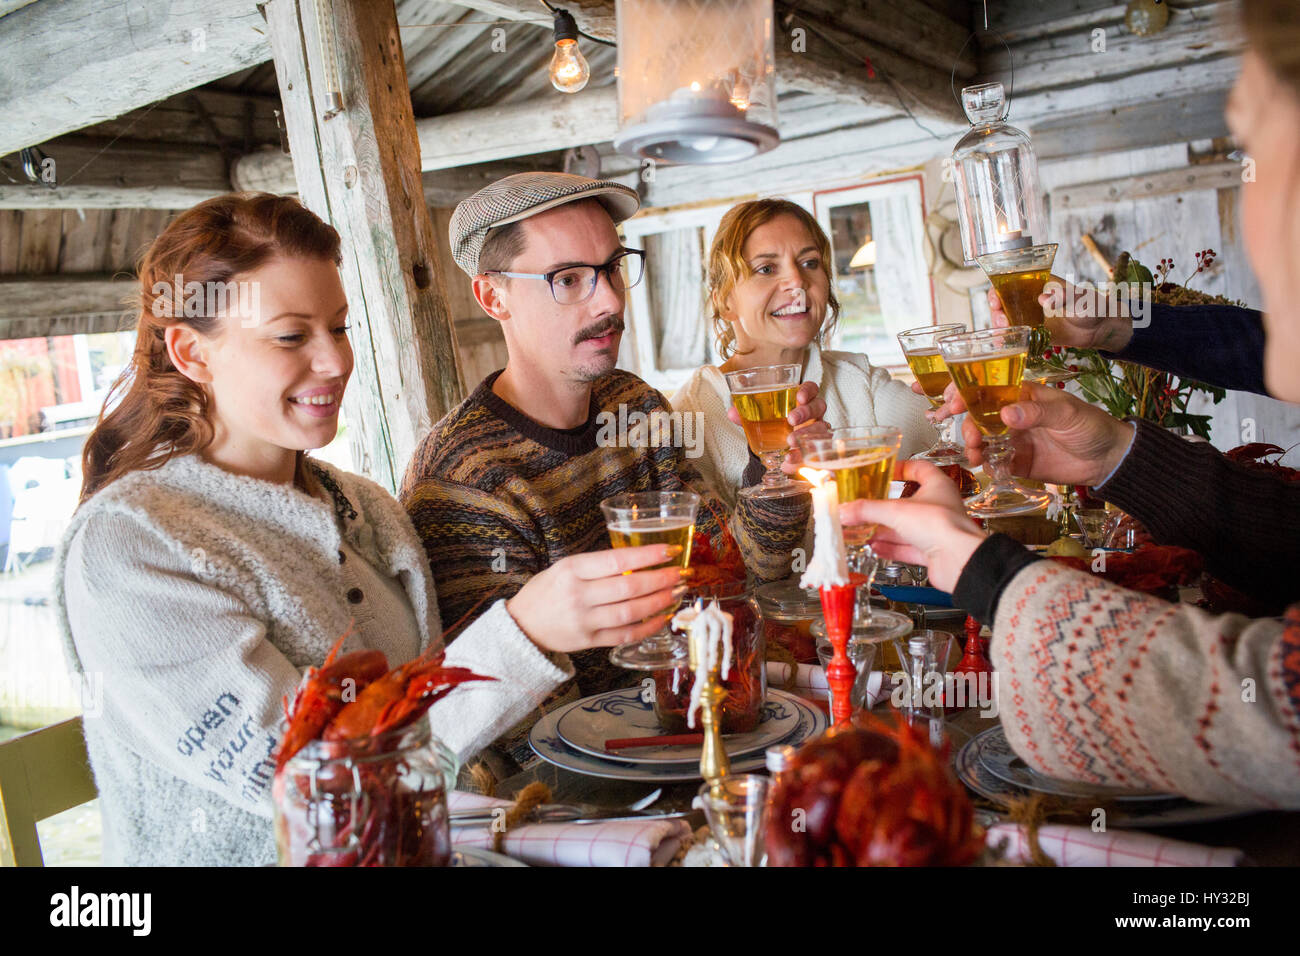 Sweden, People raising toast during crayfish party Stock Photo